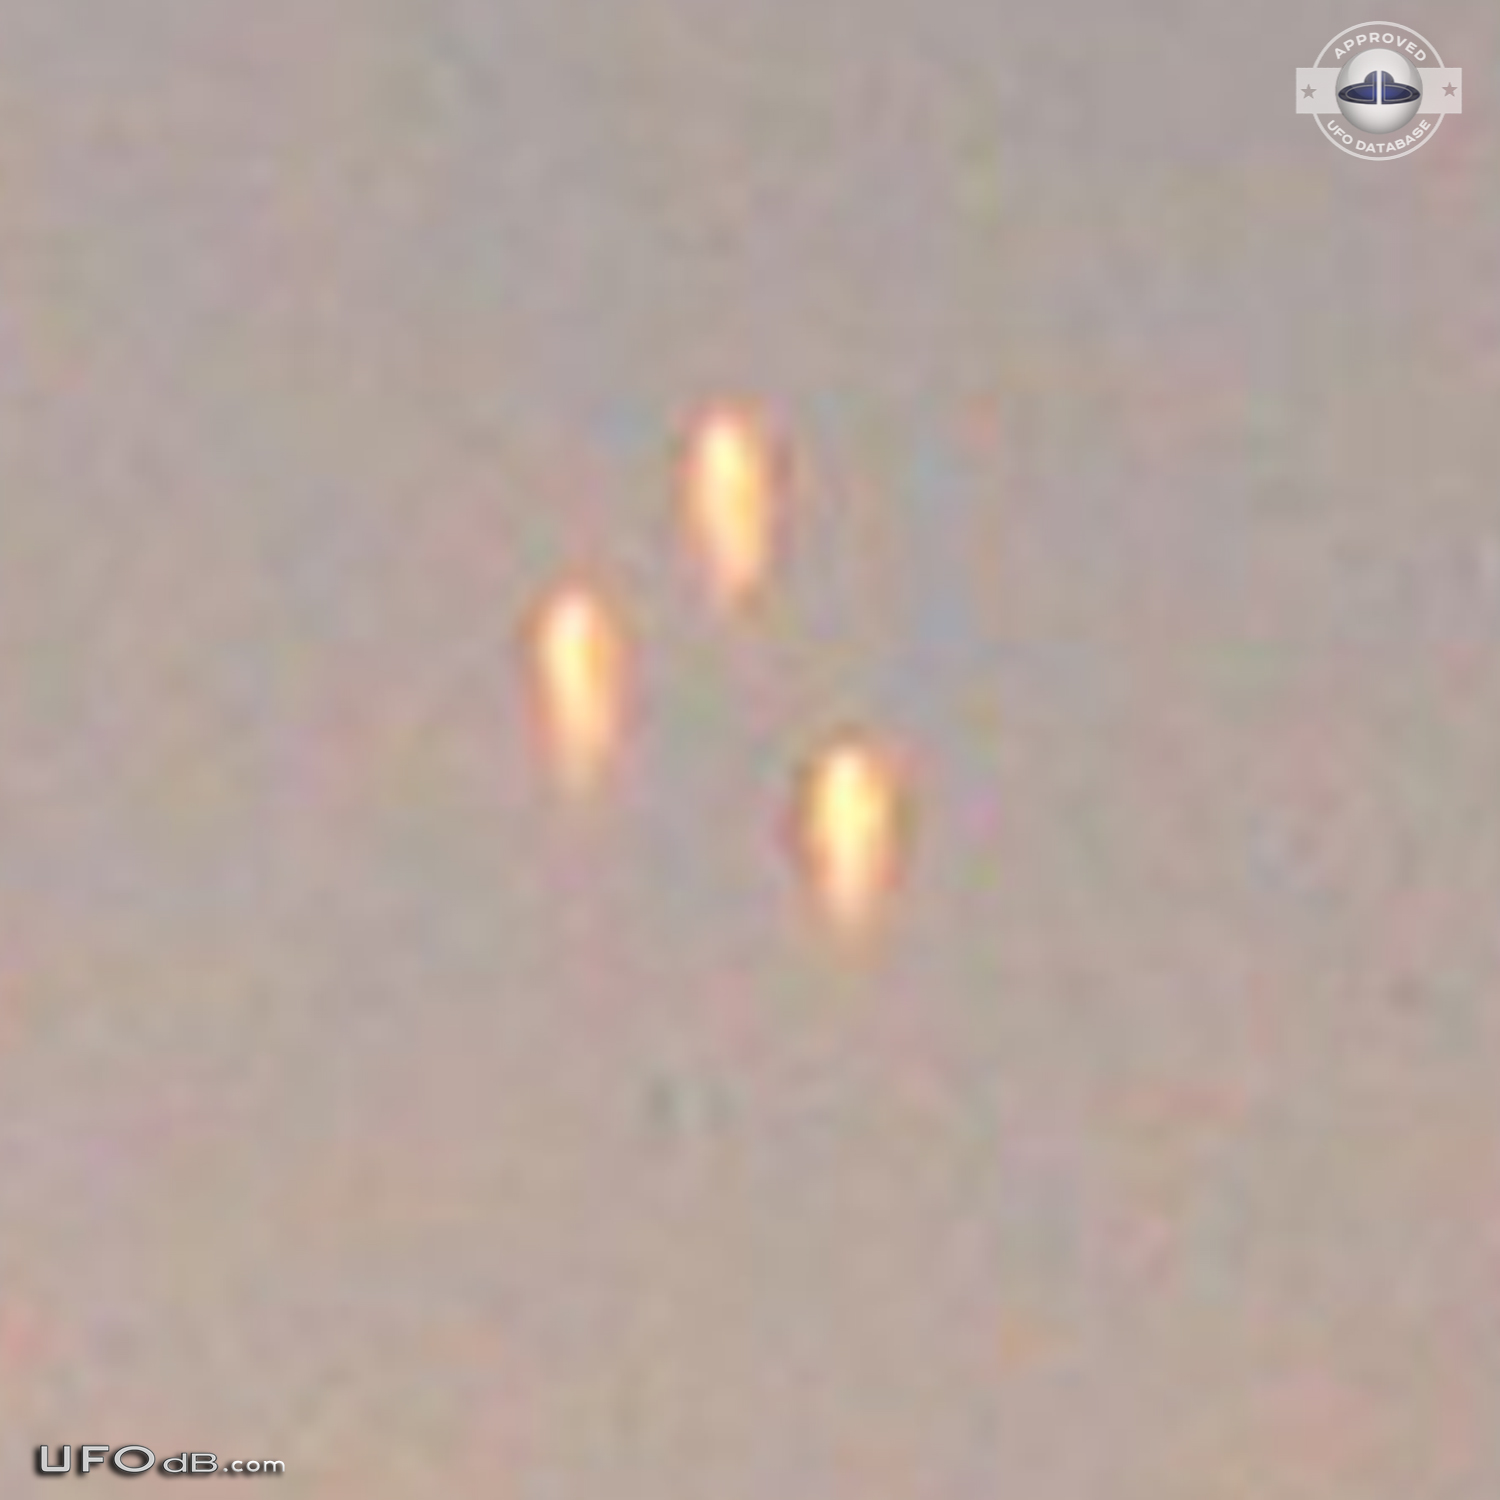 UFO orbs in Triangle formation over Nuclear plant in Pennsylvania 2012 UFO Picture #528-5